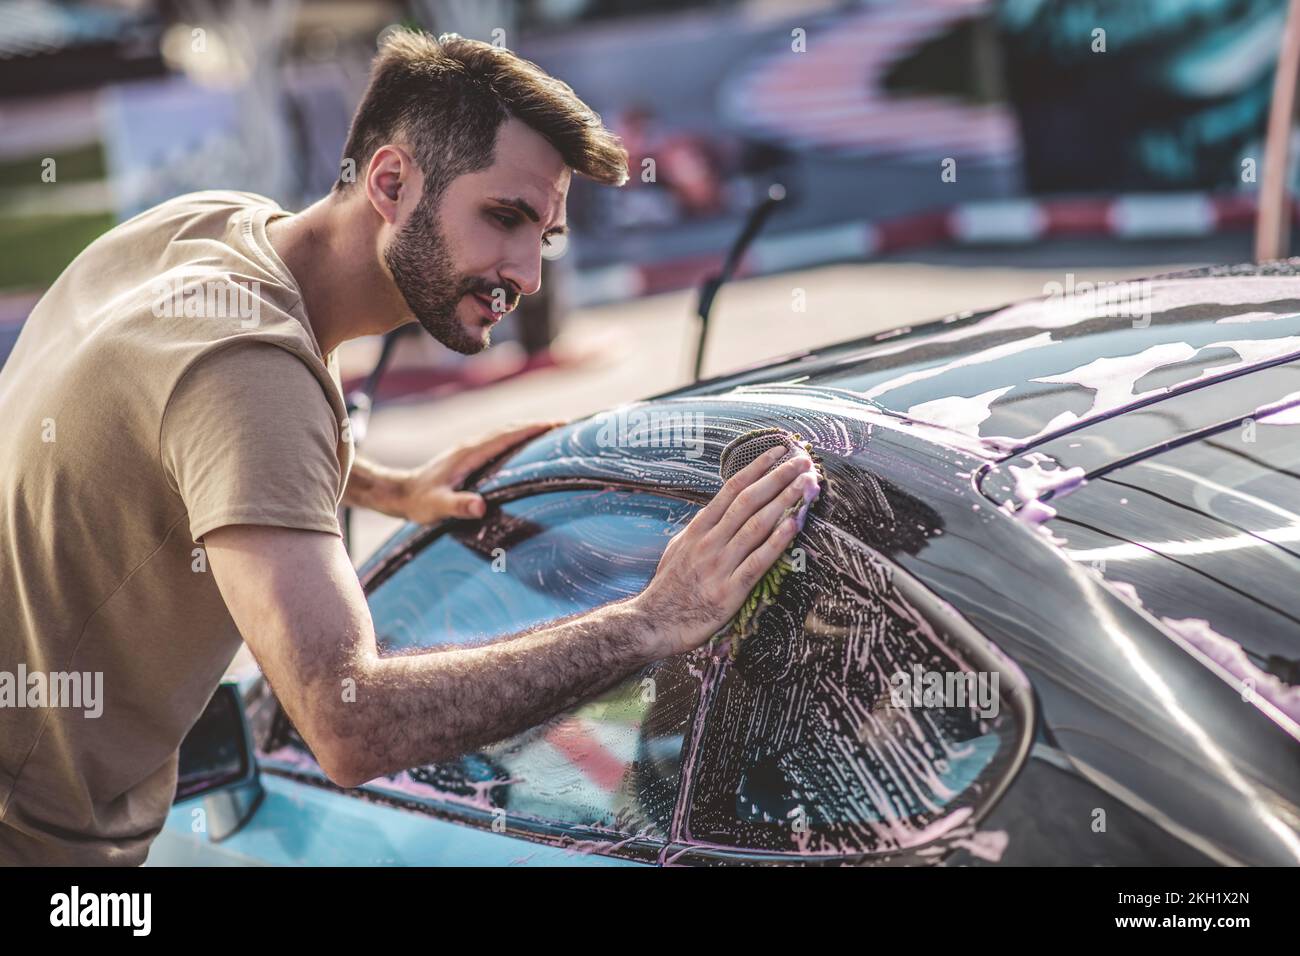 Service station worker washing the exterior of a passenger car Stock Photo